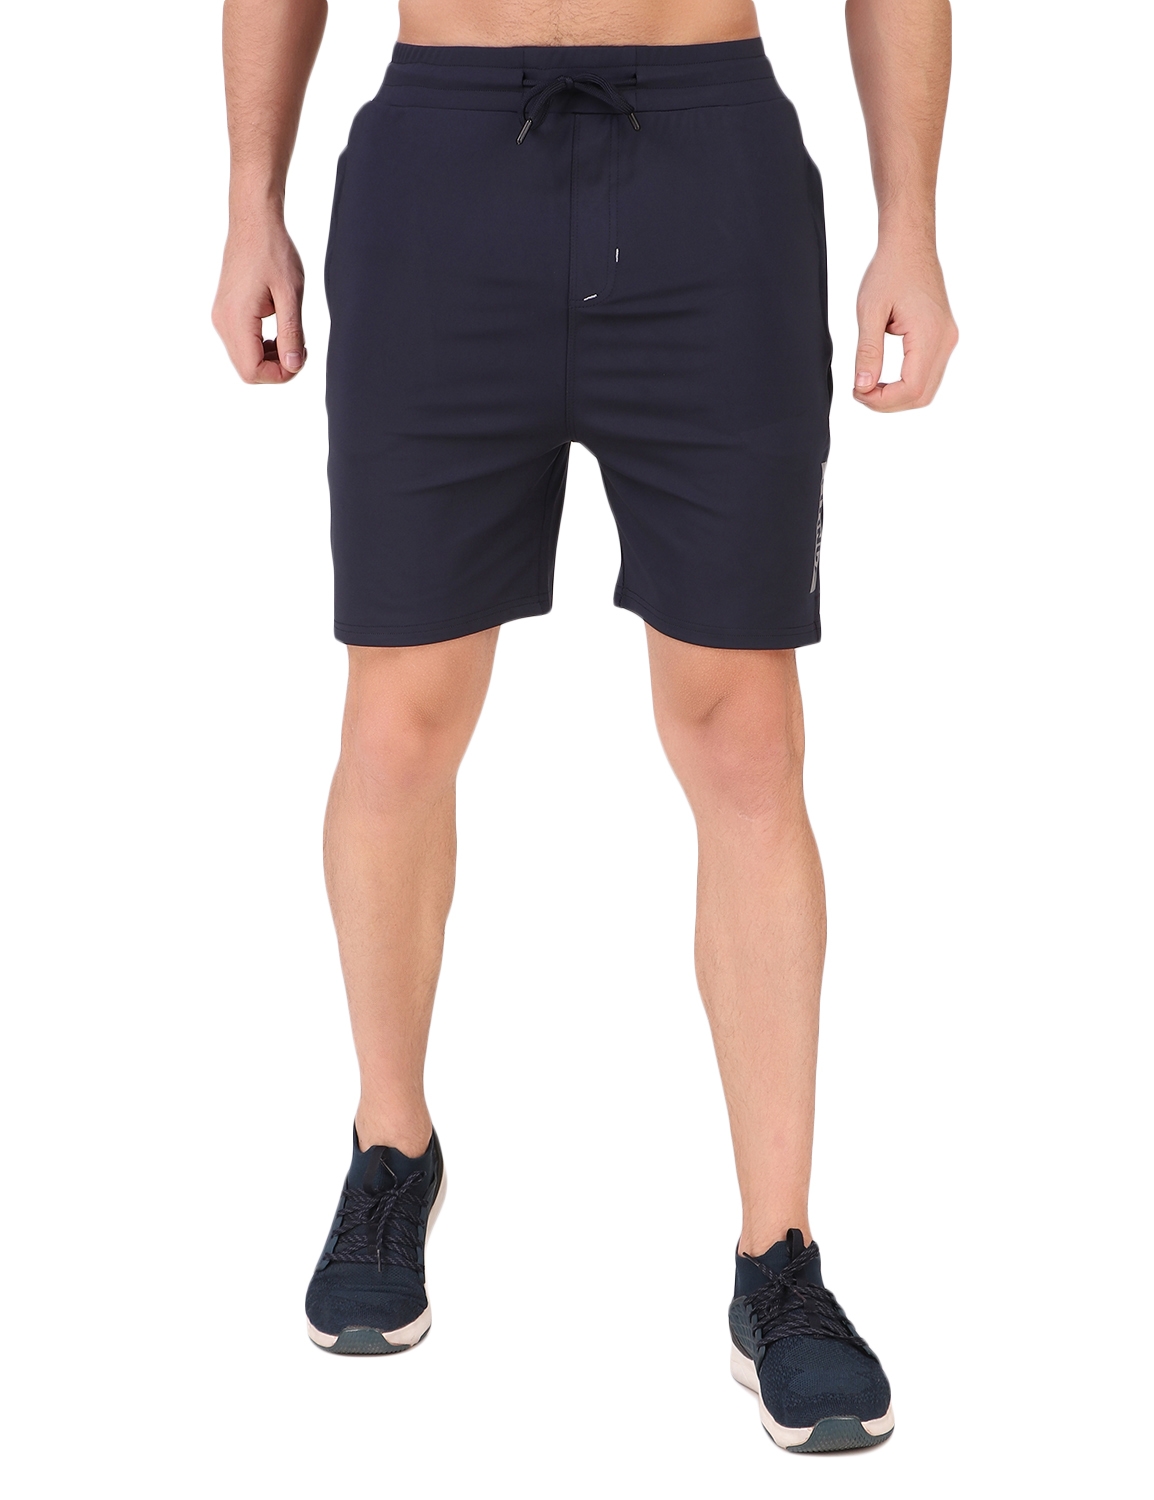 Fitinc | Fitinc Stretchable Men's Navy Blue Shorts for Gym, Running, Jogging, Yoga, Cycling, and Active Sports